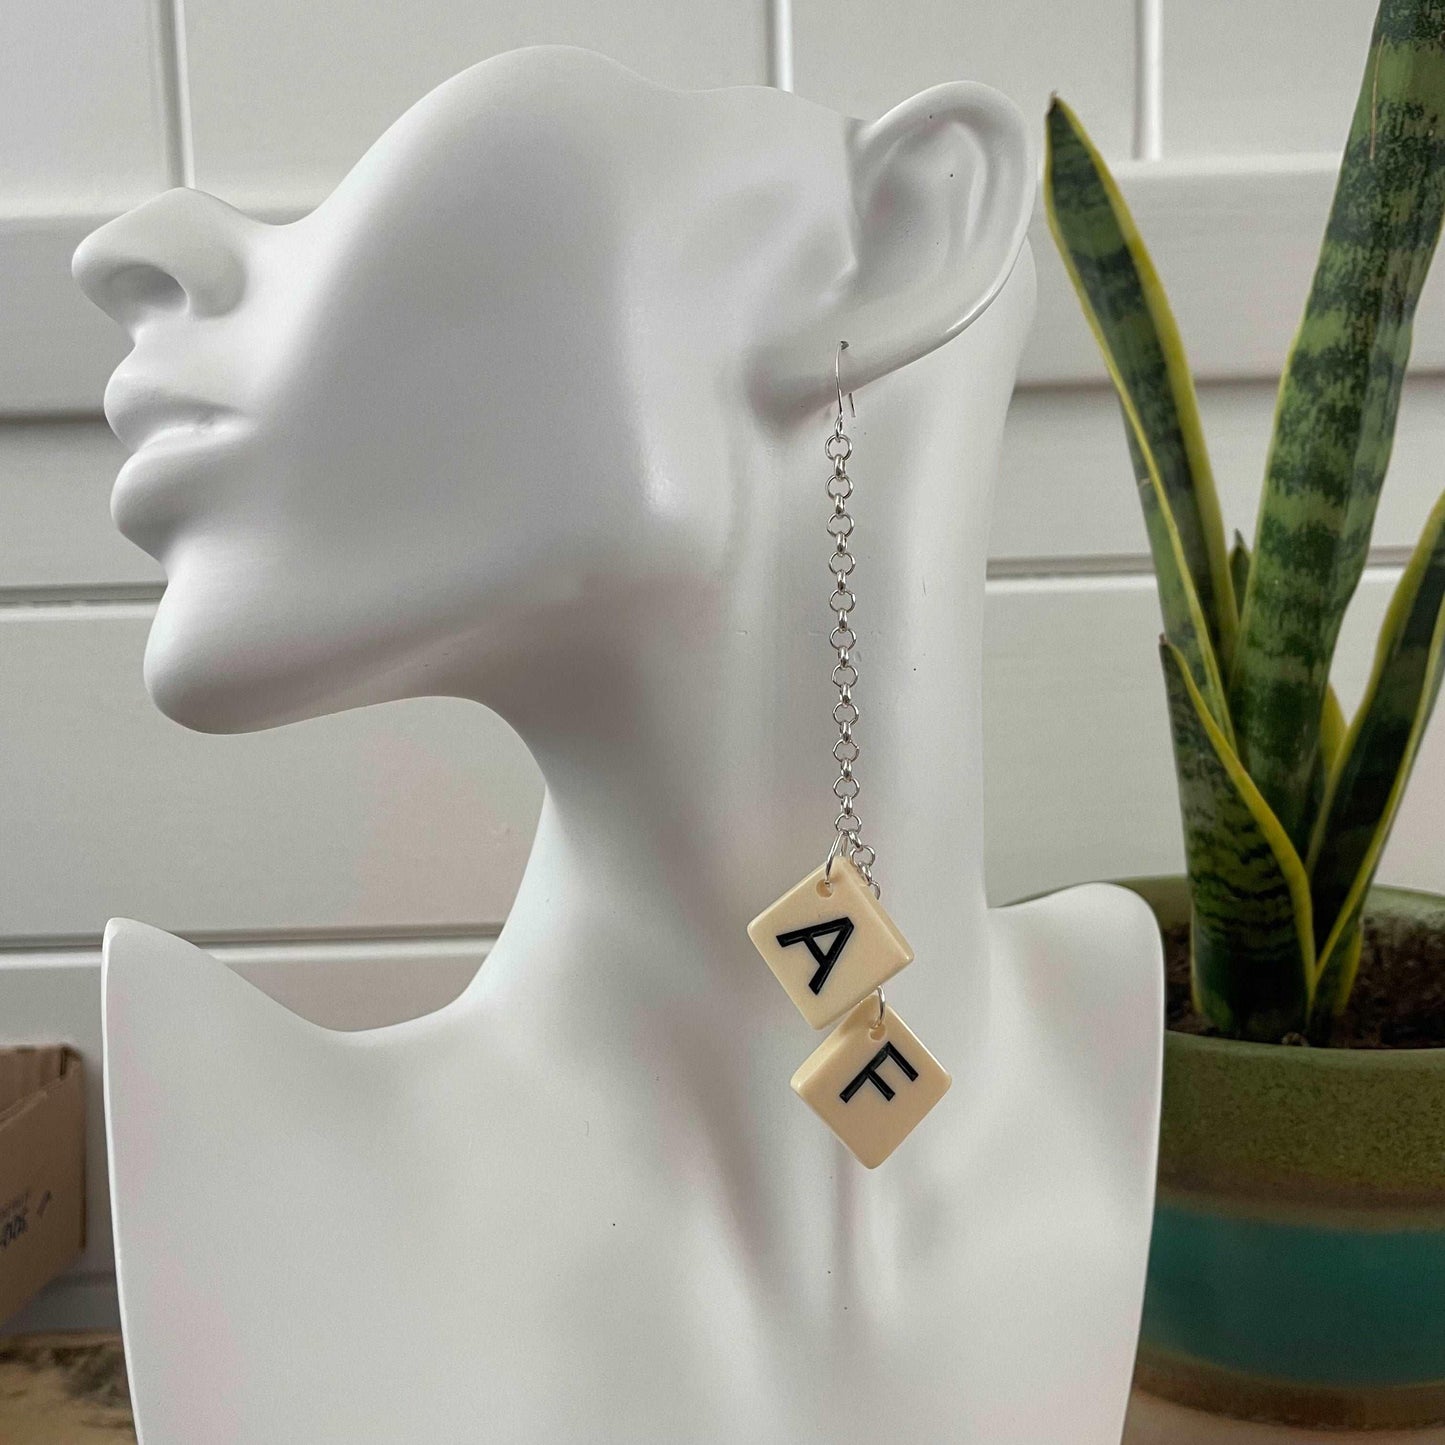 AF Long Statement Earrings 4.75" Letter Game Tile Cream Resin Repurposed Upcycled Fun Game OOAK, displayed on a solid white mannequin